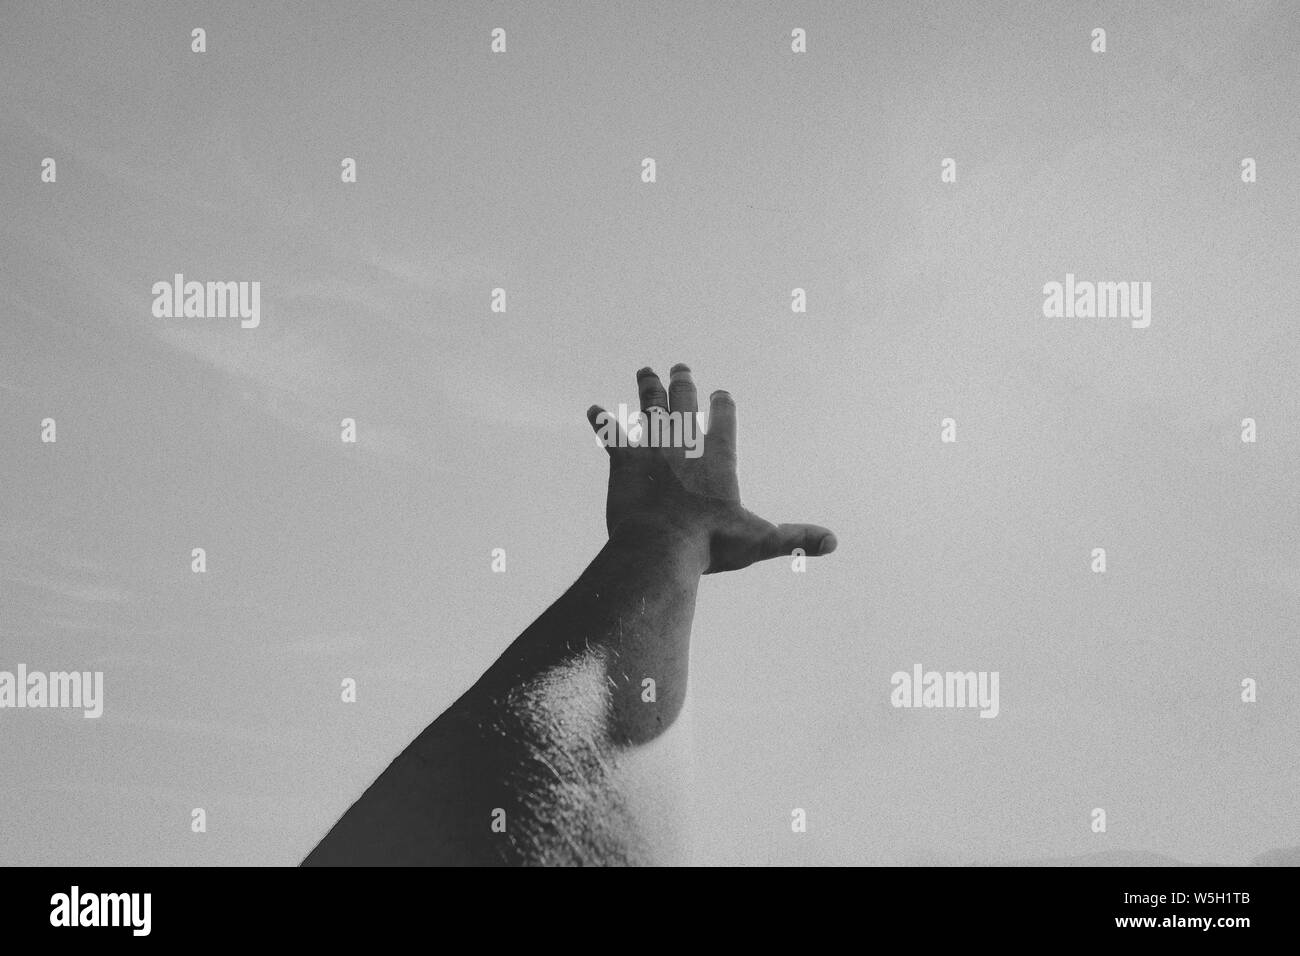 Black and white monochrome shot of a person's left hand on a wide surface Stock Photo